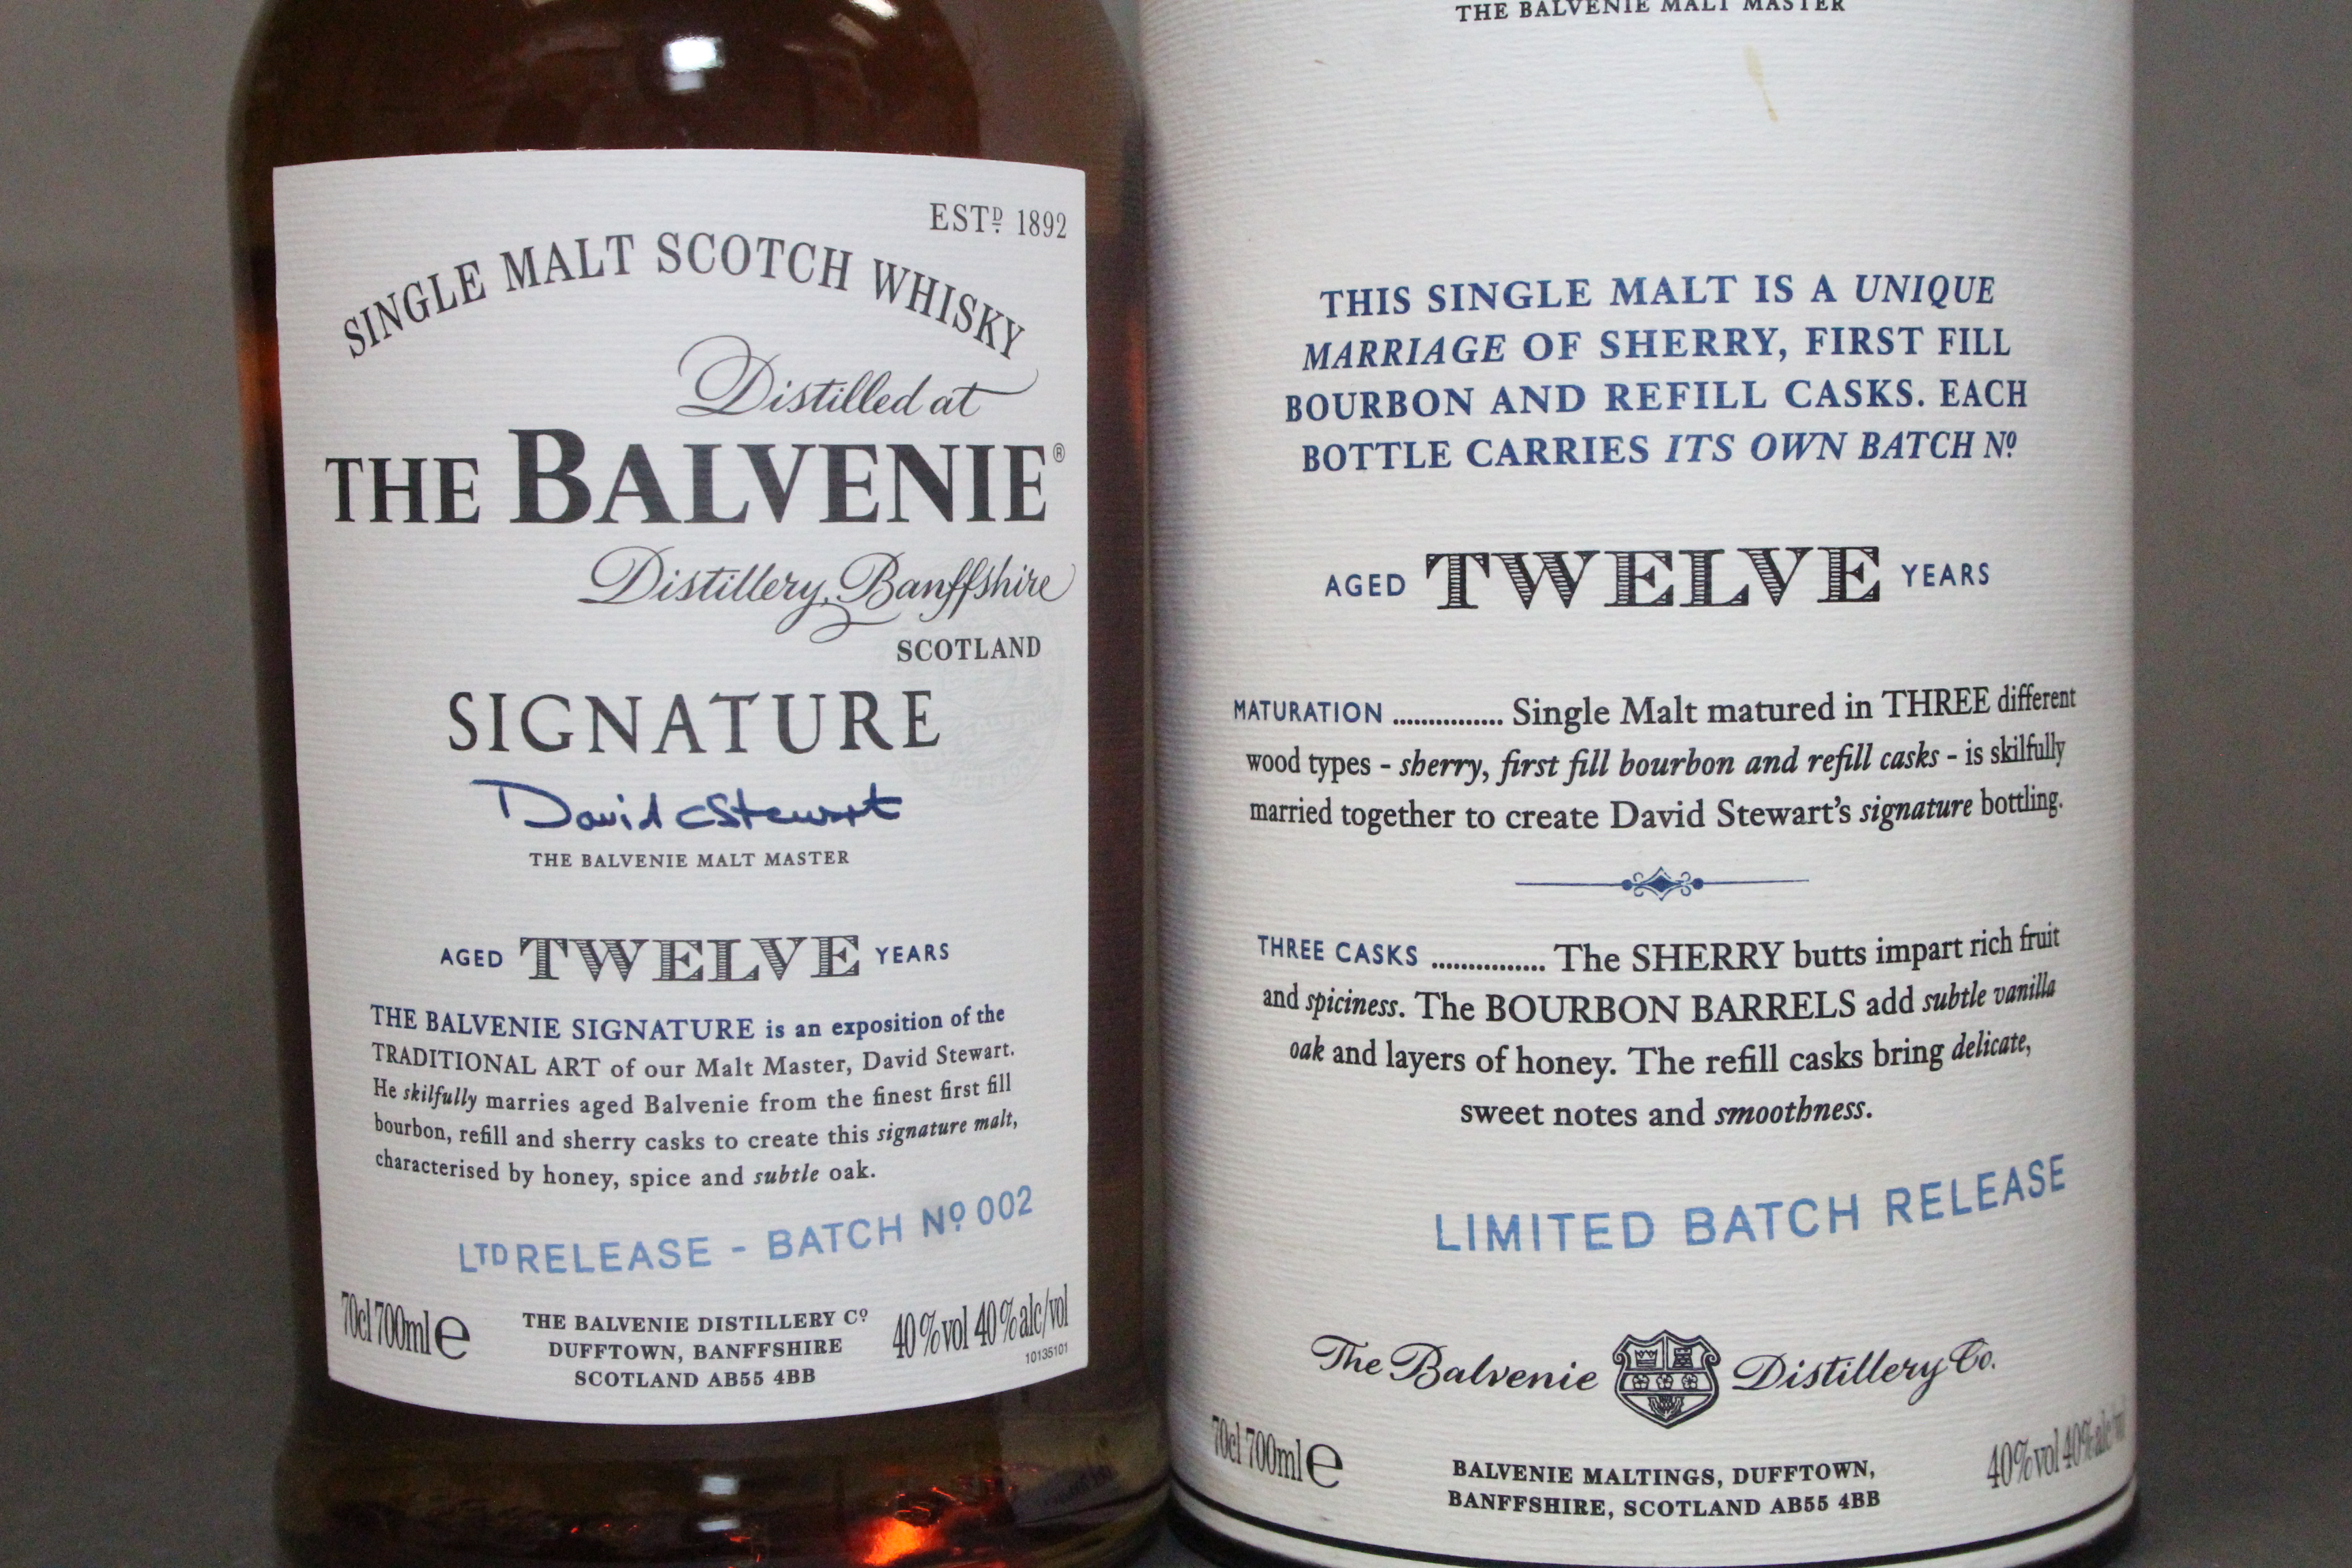 One bottle of “The Balvenie ‘Signature’ 12 Year Old Single Malt Scotch Whisky, Limited Batch Release - Image 2 of 2